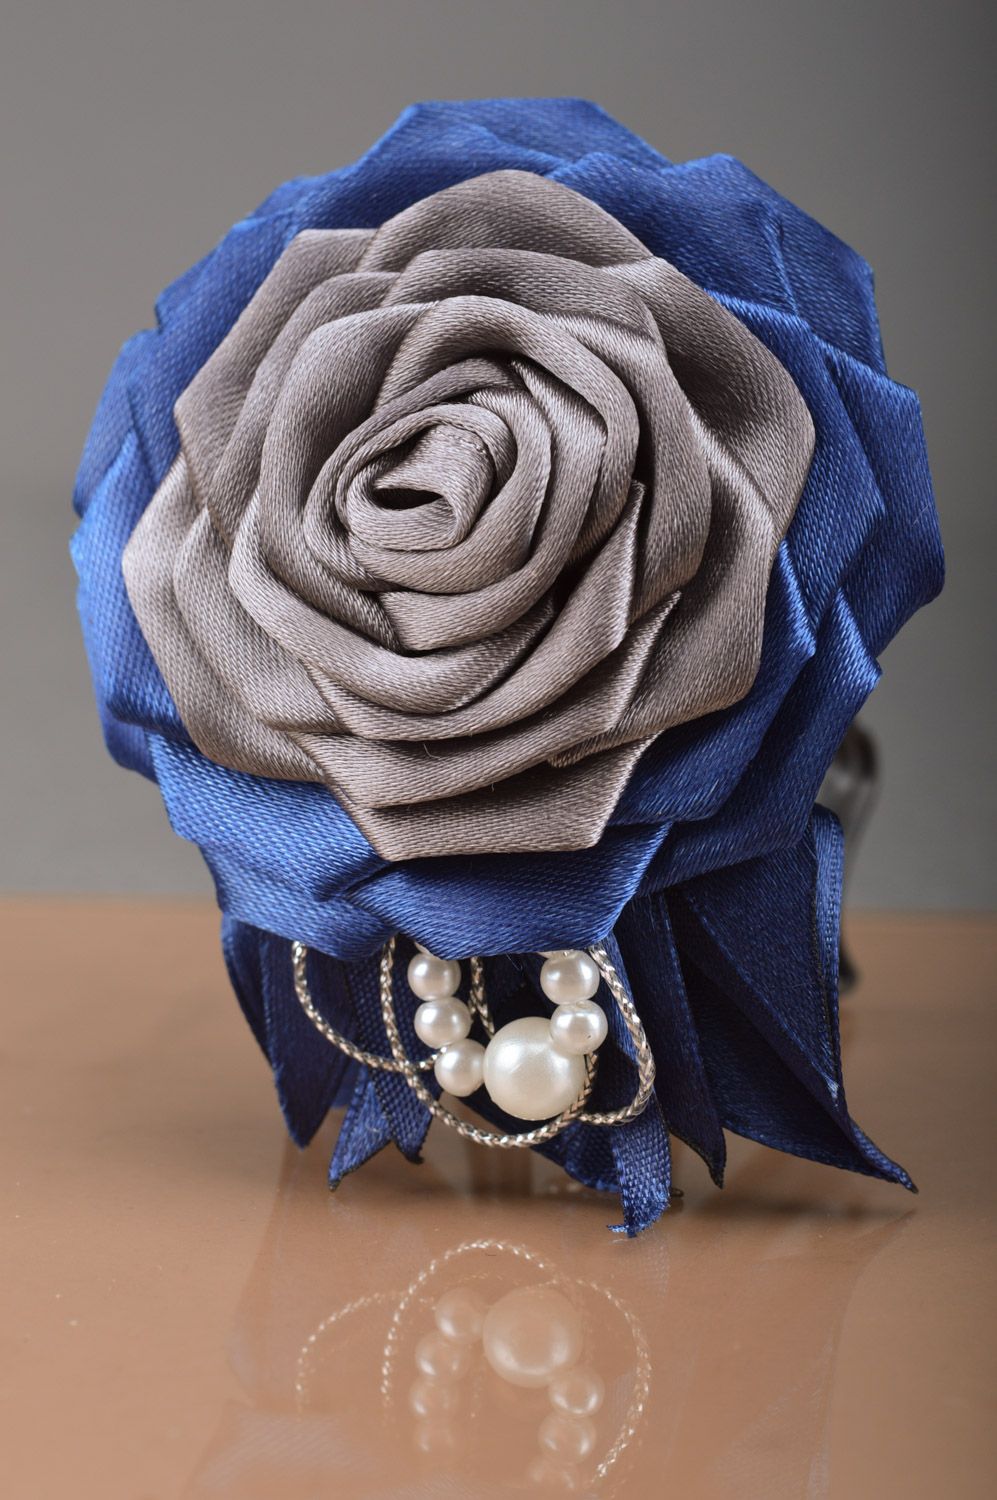 Handmade designer fabric brooch in the shape of blue and gray rose with beads photo 5